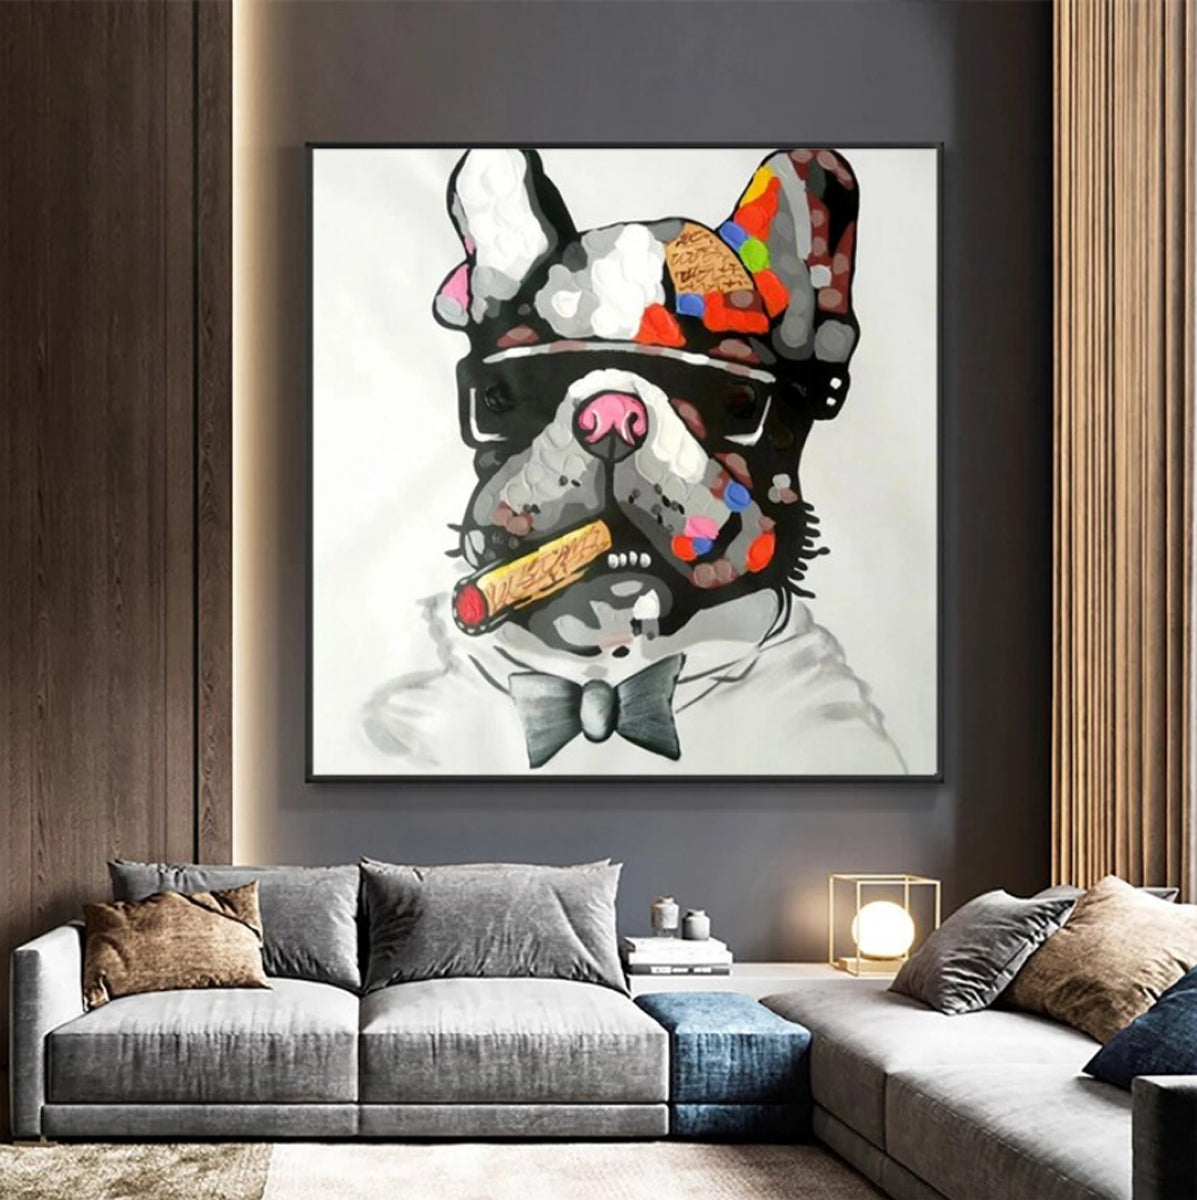 – Colorful and Poster Canvas / / TPFLiving Animal Abstract, Motifs Funny Traumpreisfabrik